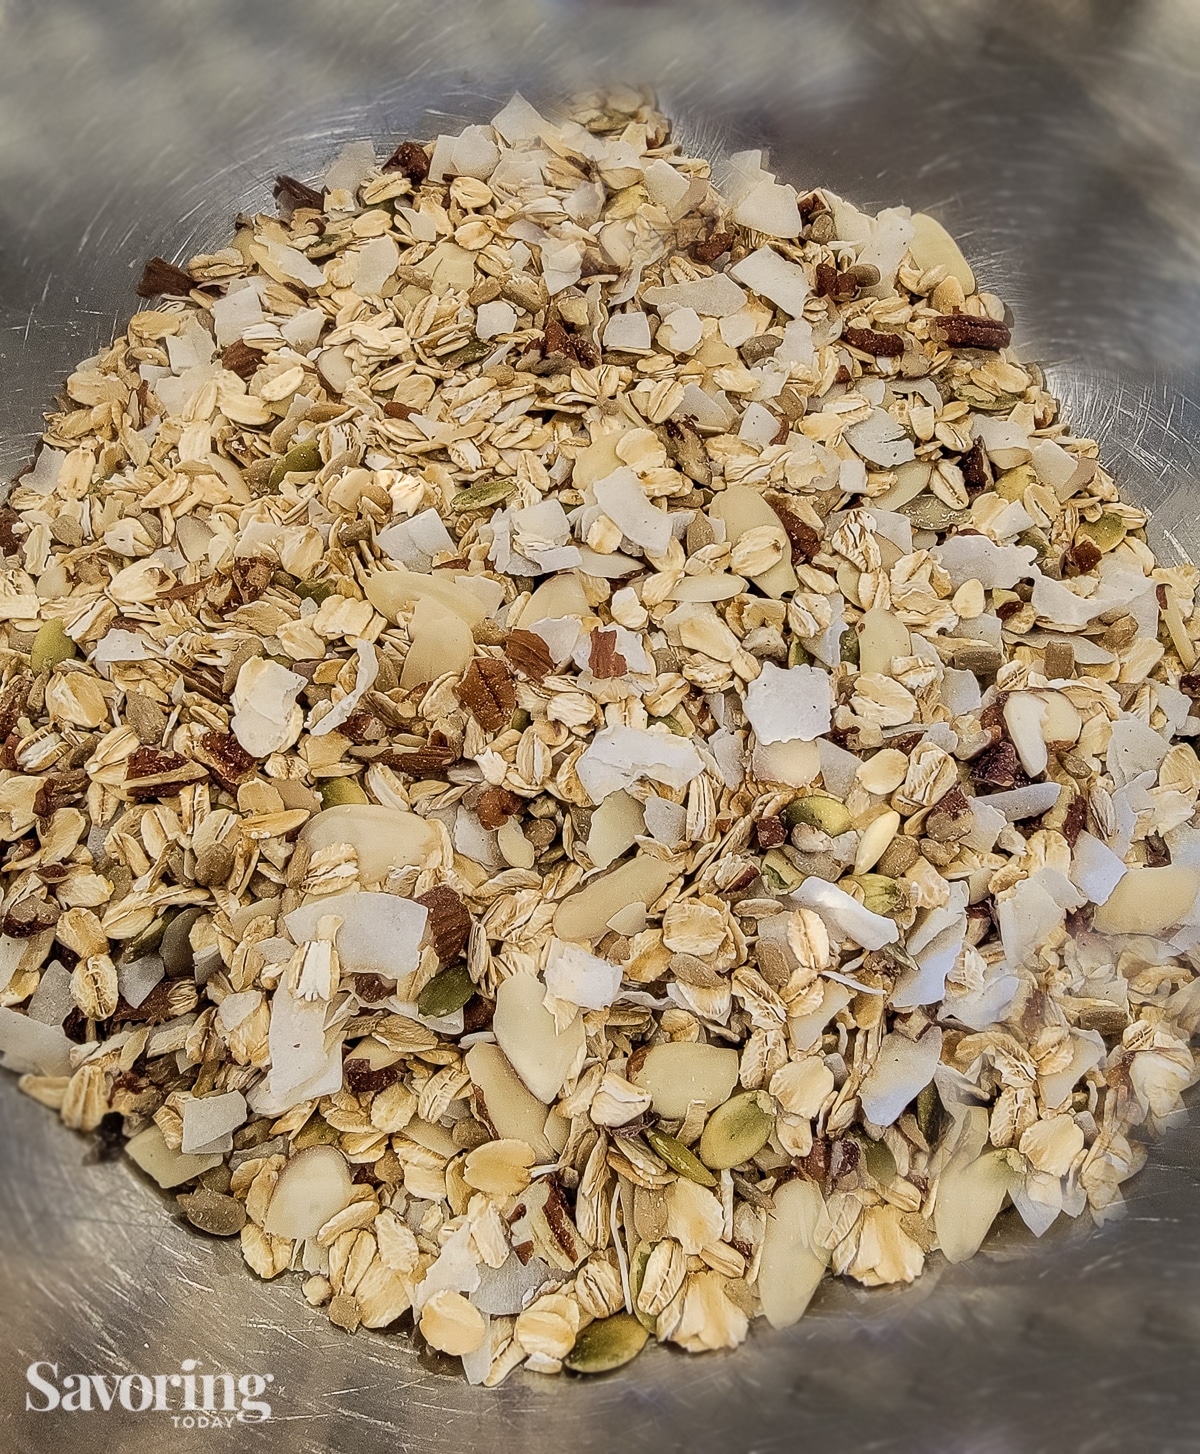 Raw granola mixed in a stainless steel bowl